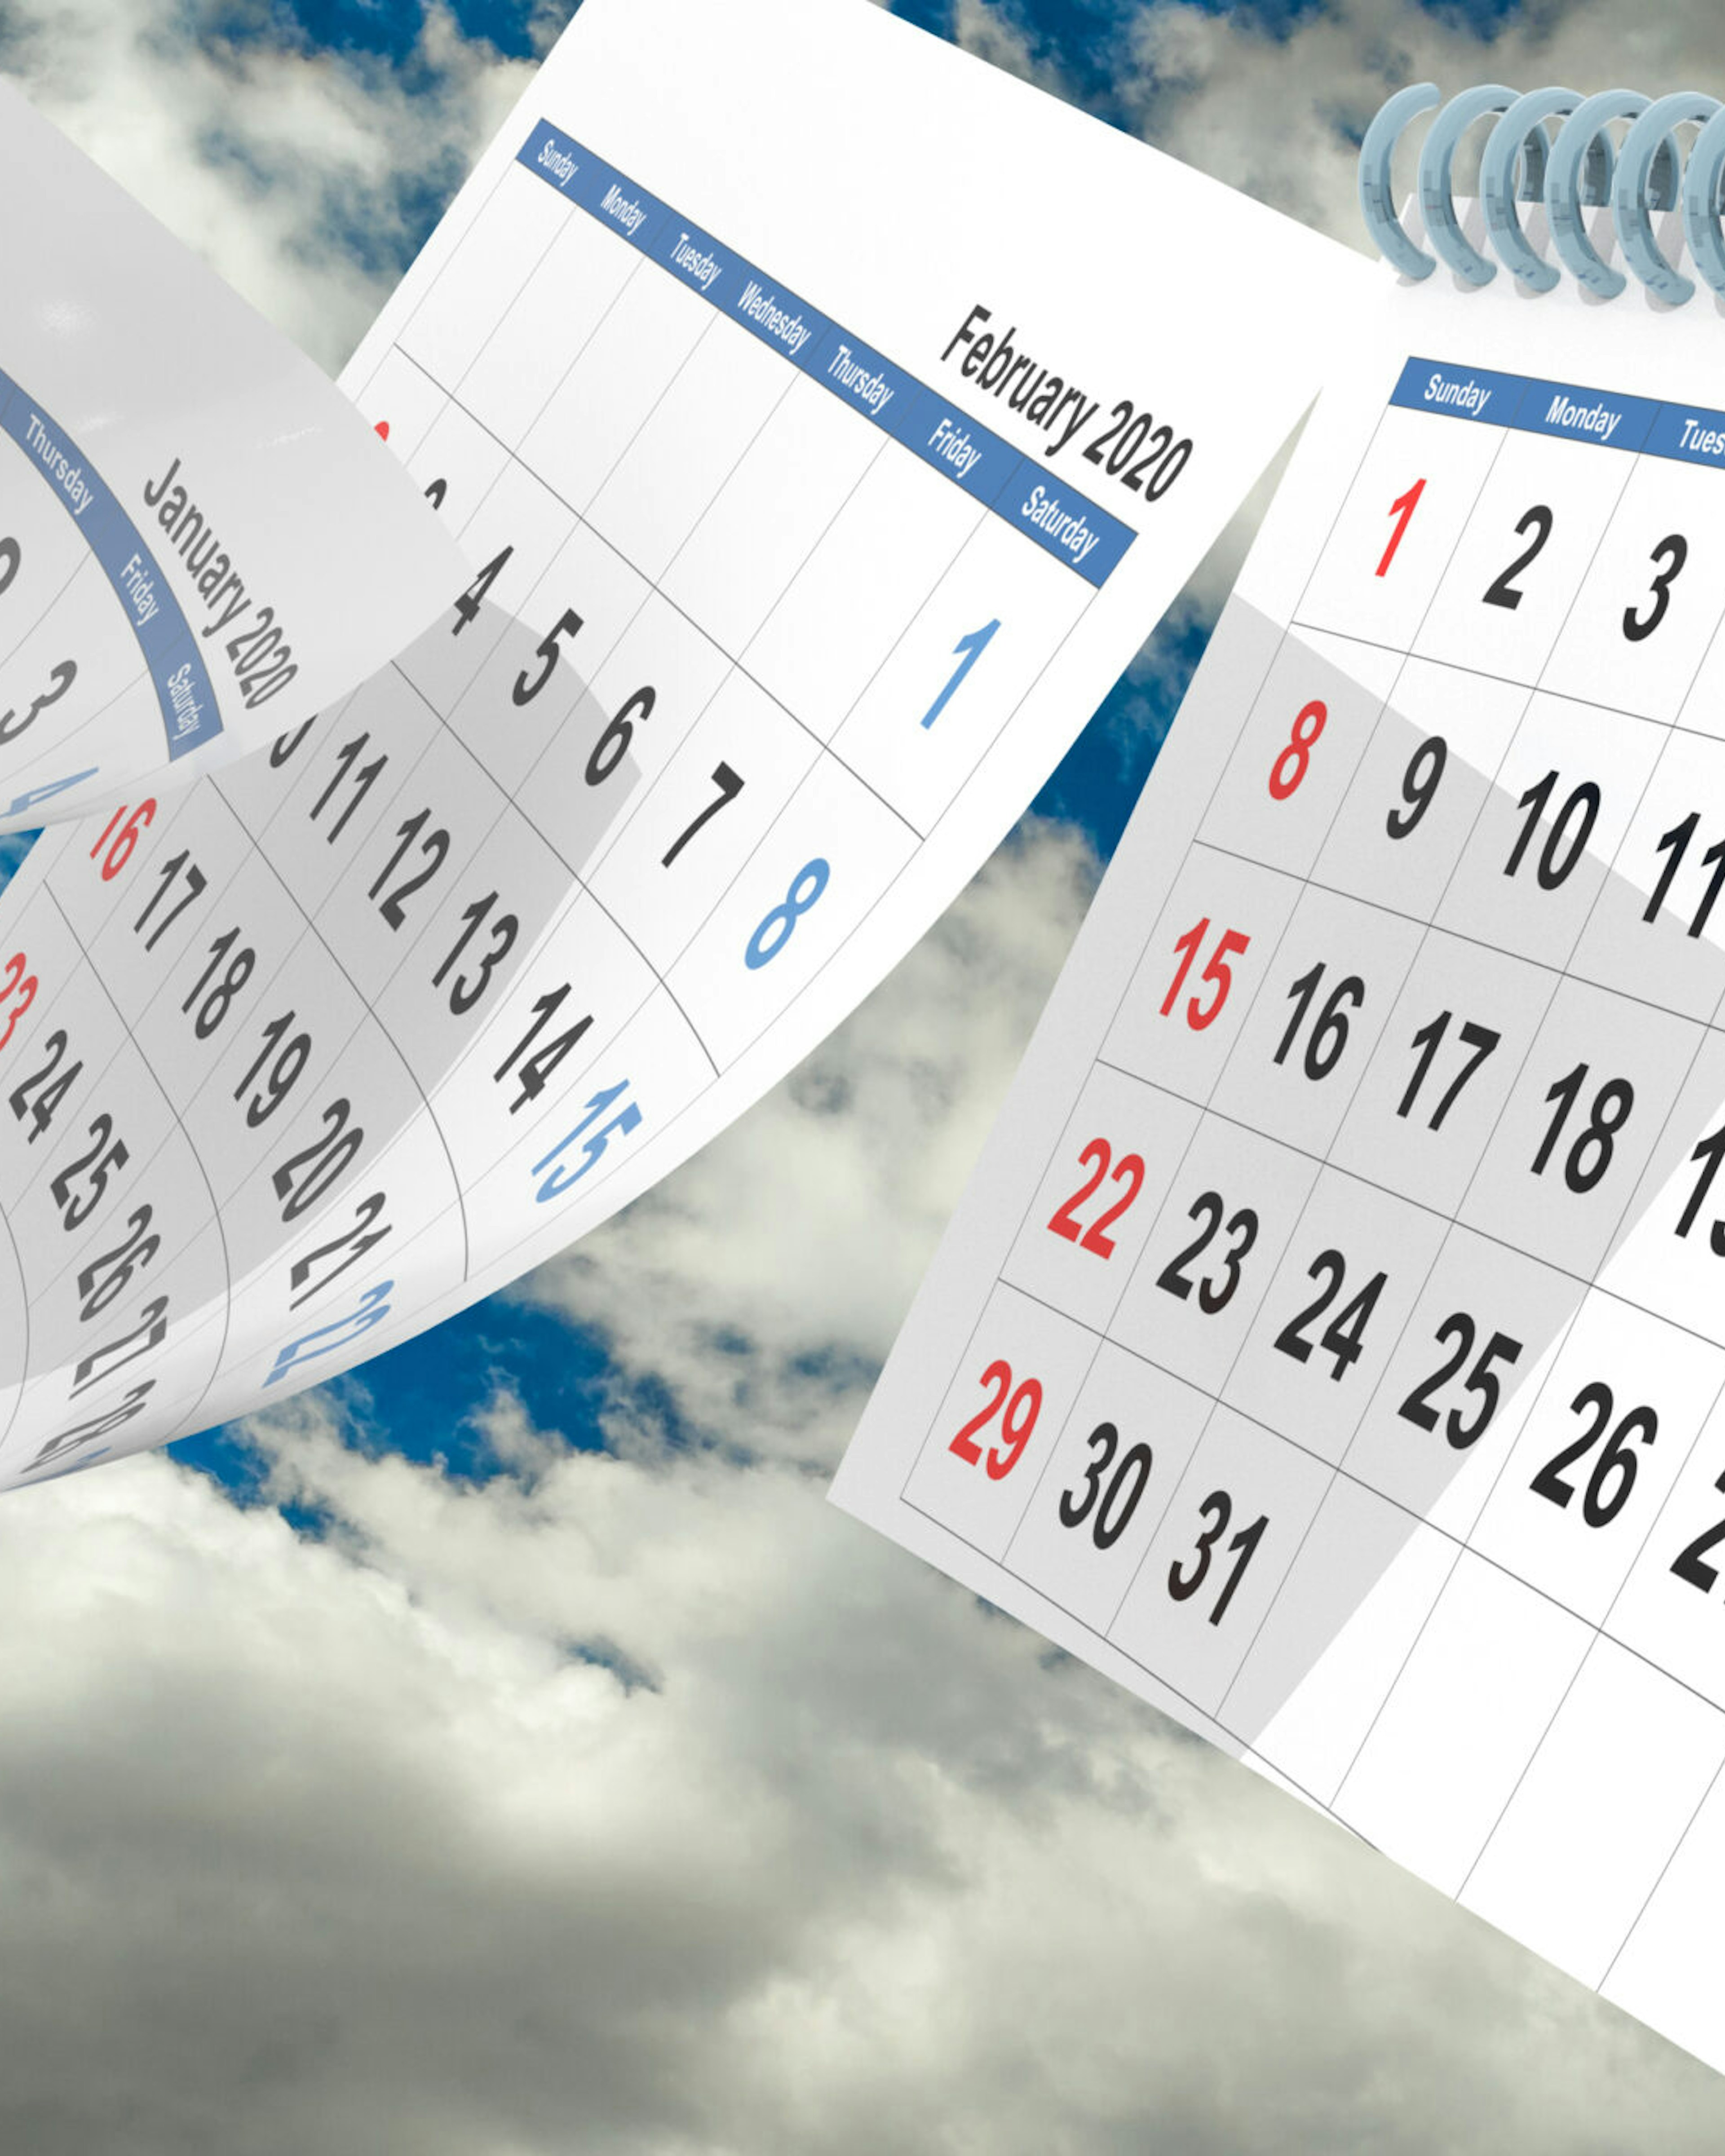 march 2020 calendar fllying pages on sky and clouds backgrround - 3d rendering